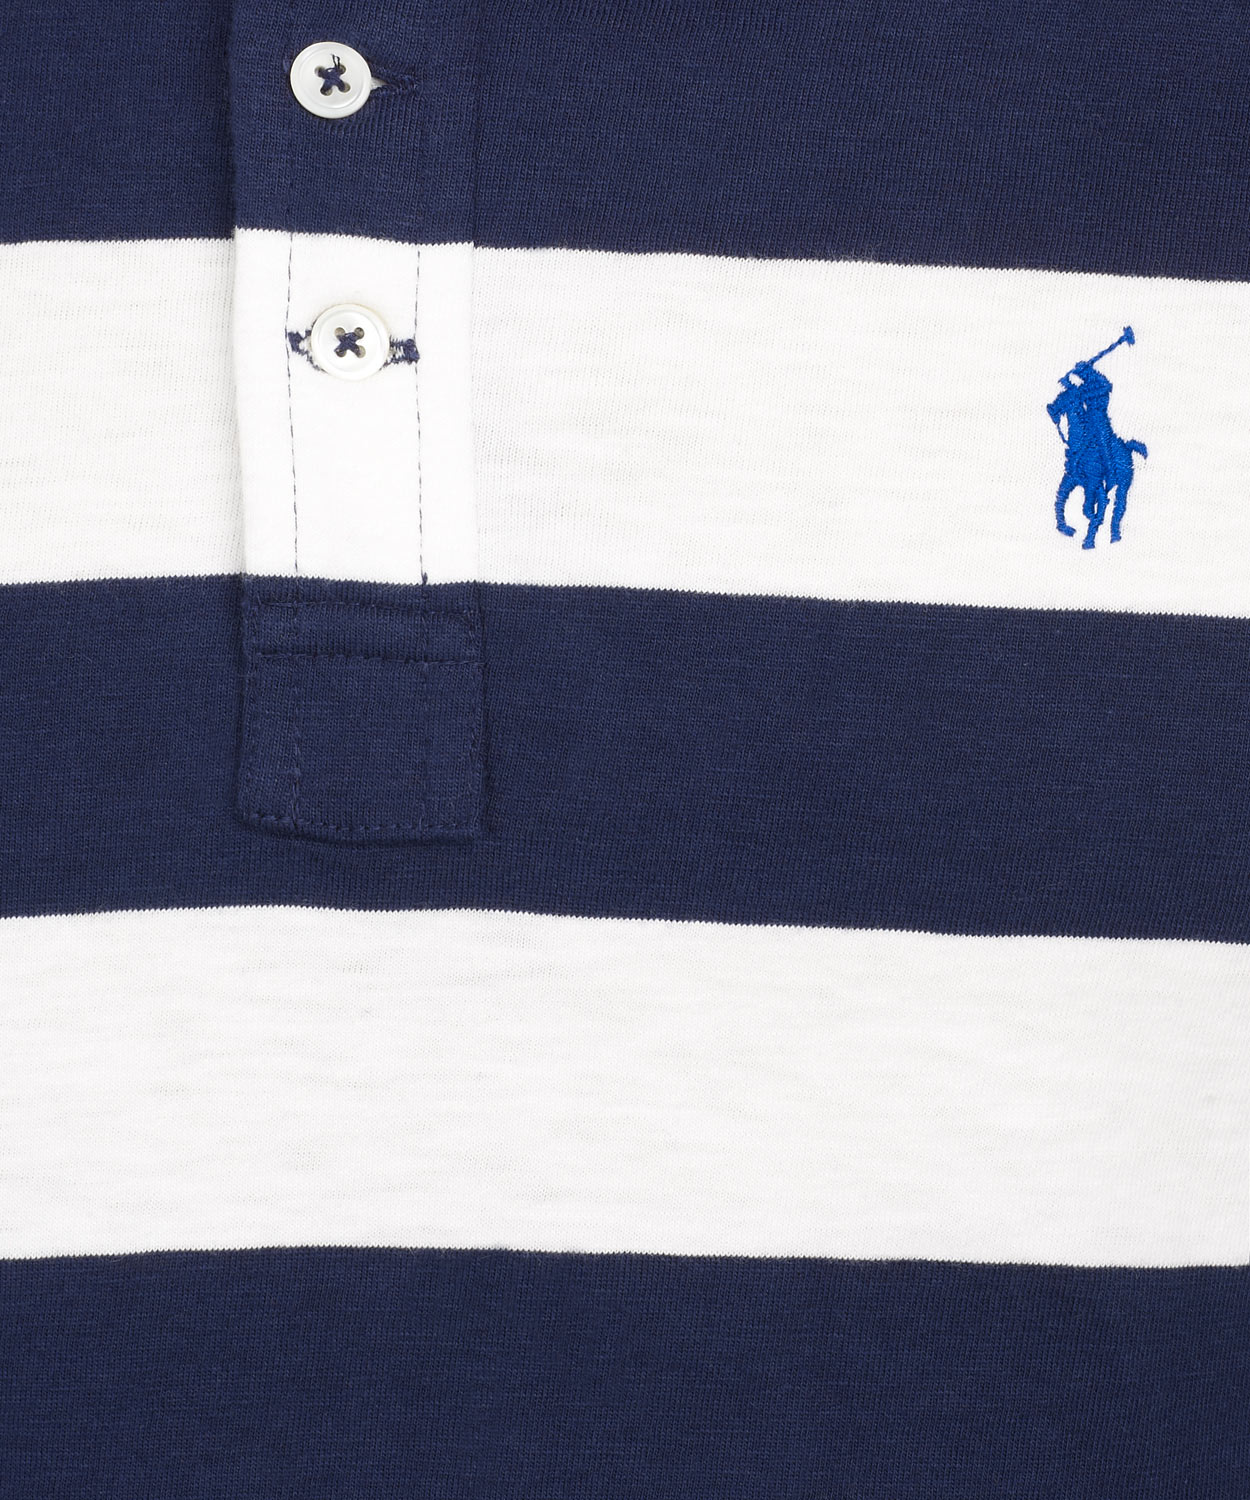 Lyst - Polo Ralph Lauren Navy and White Stripe Jersey Shirt in Blue for Men